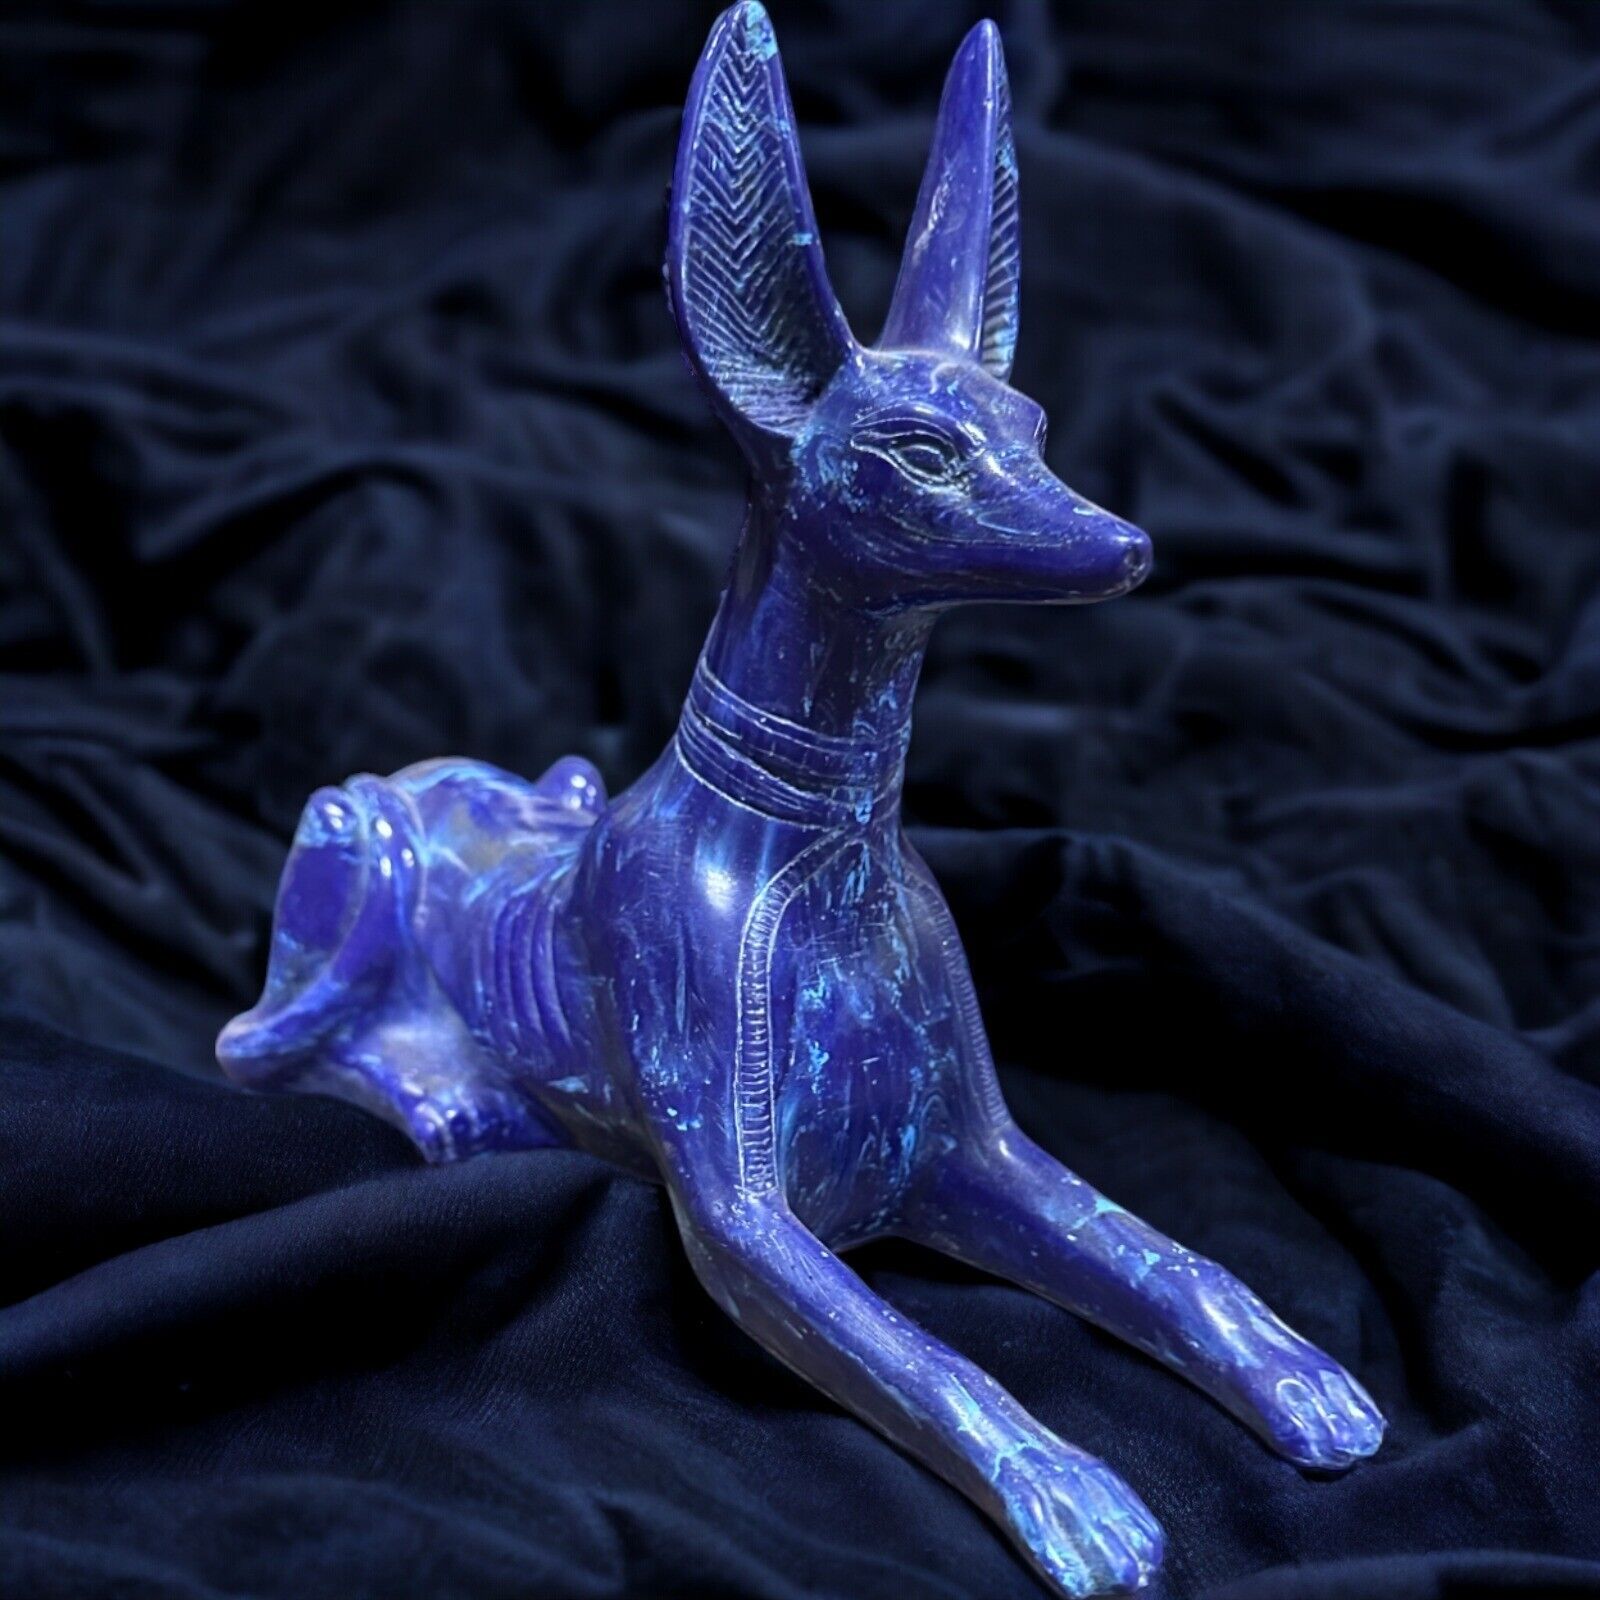 Rare Anubis Statue in Lapis Lazuli - Handcrafted Egyptian Pharaonic Sculpture